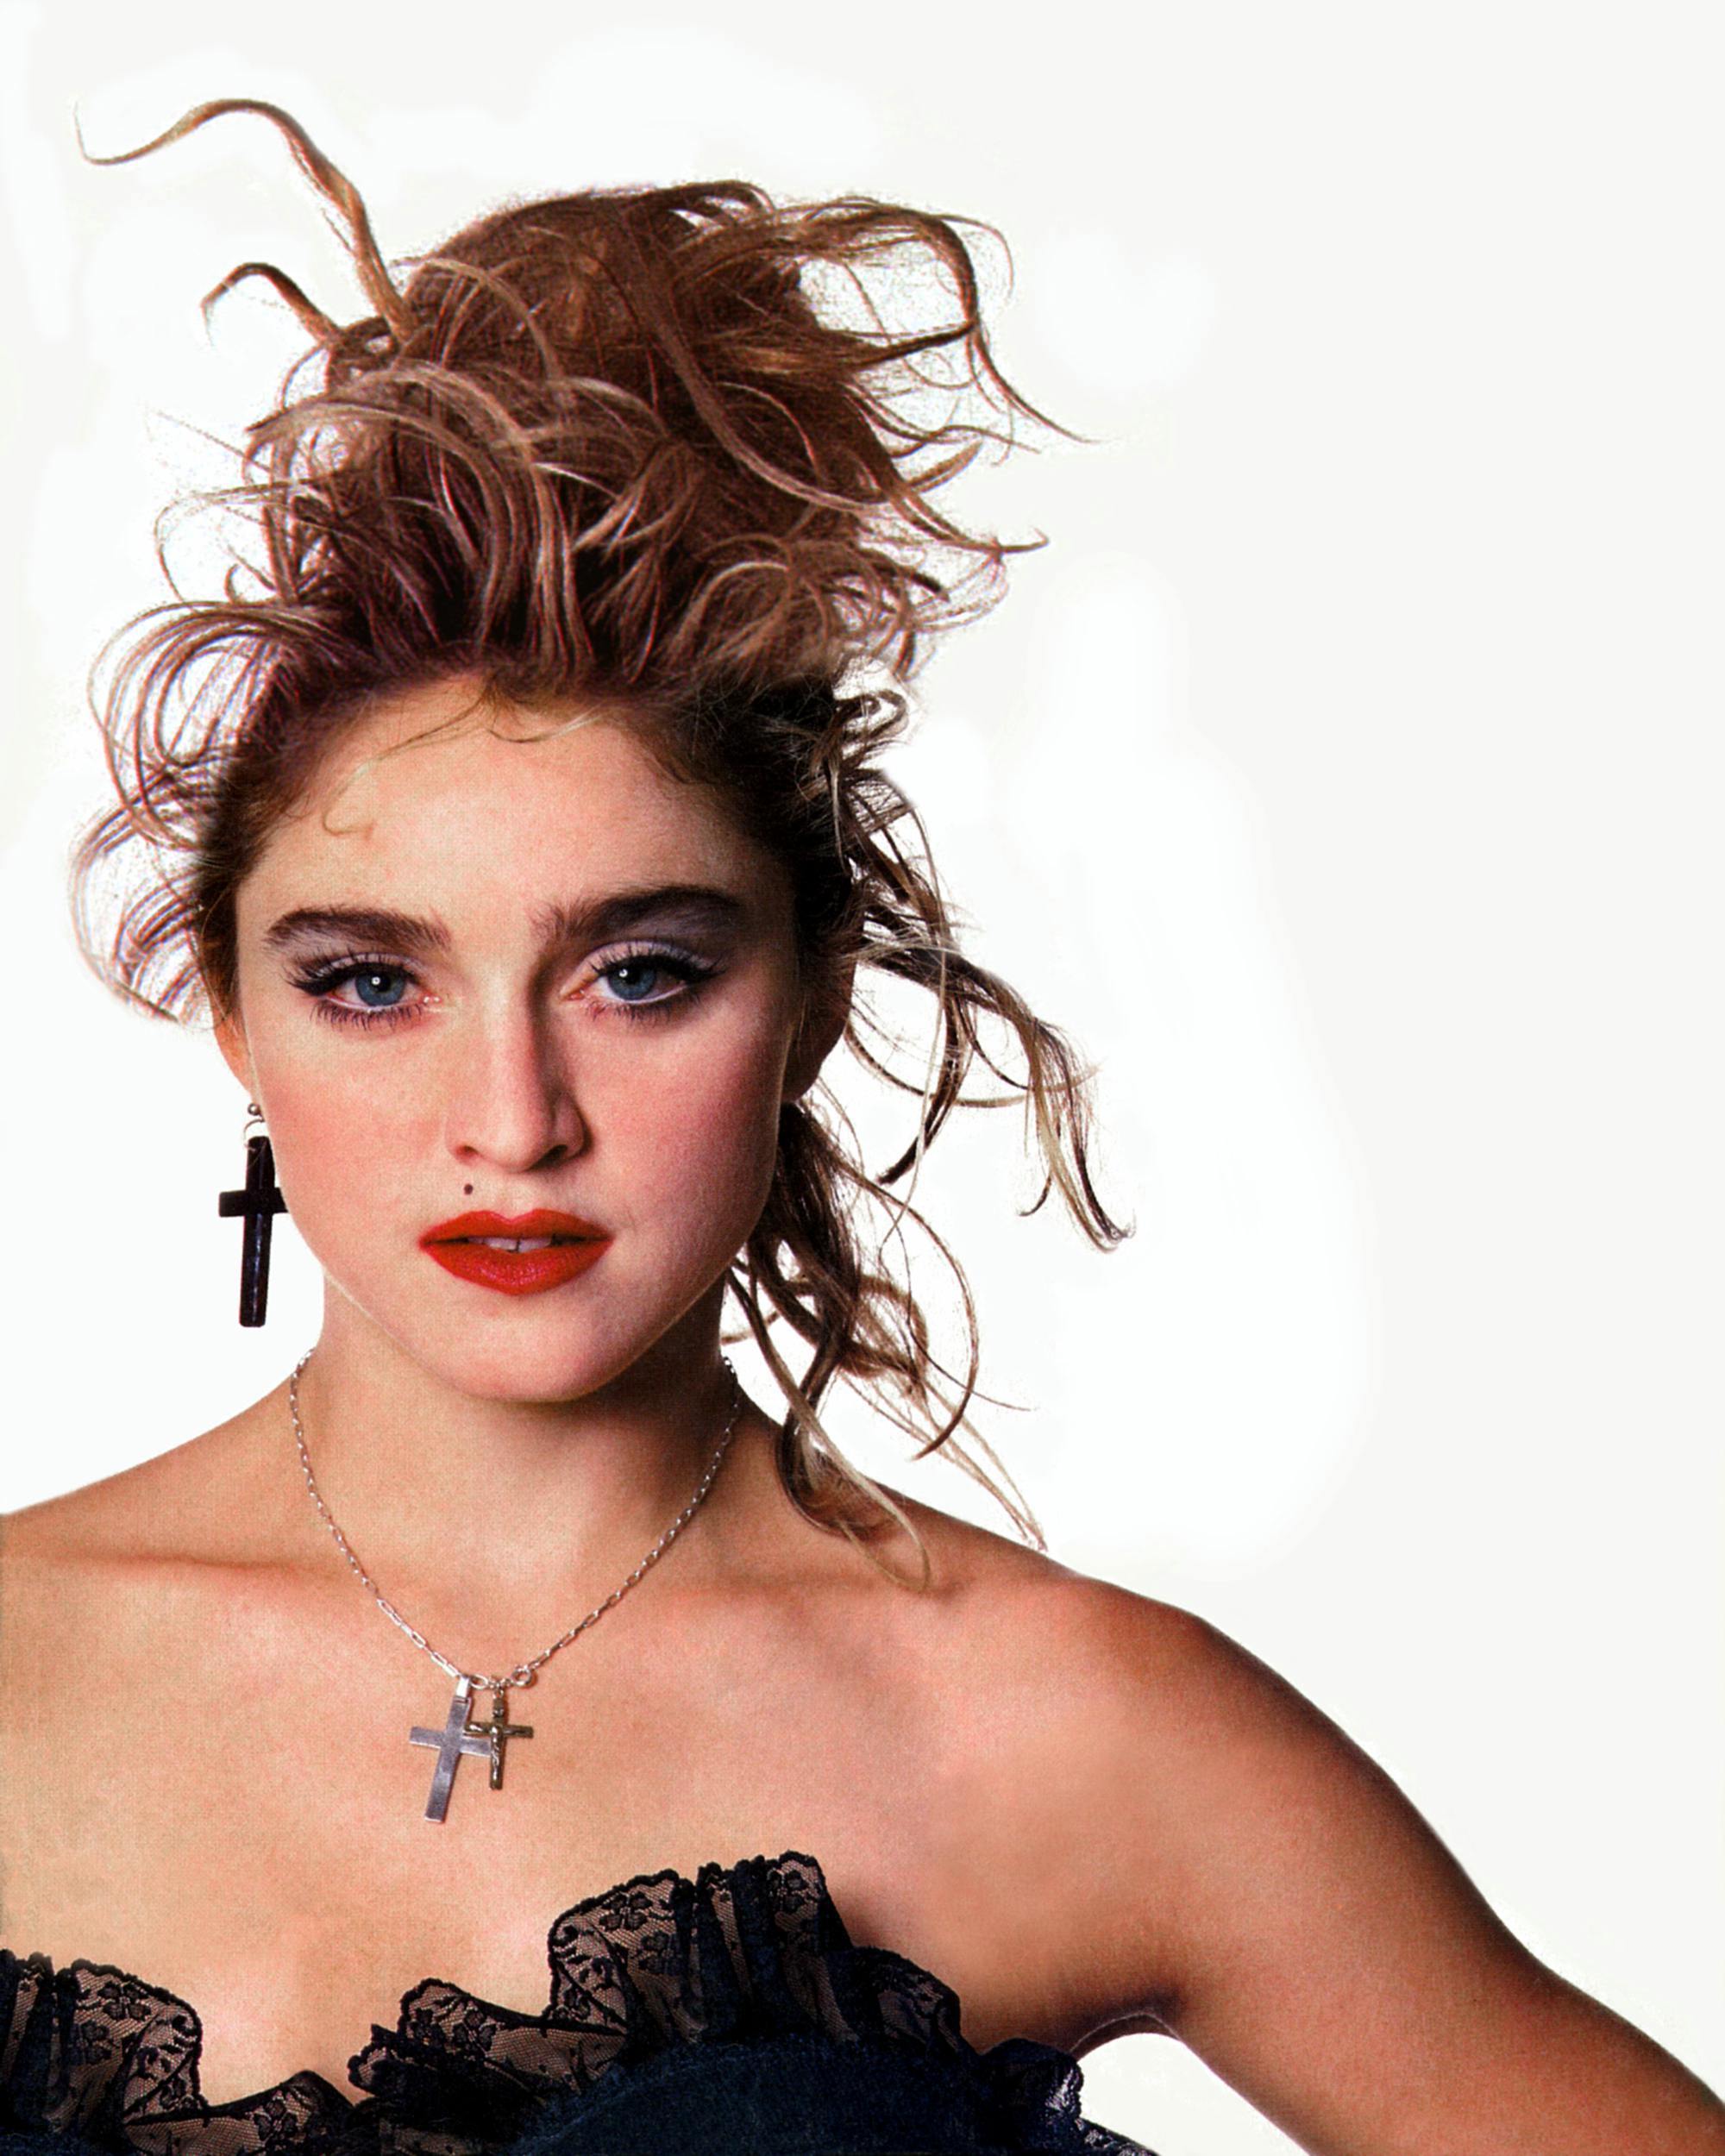 Madonna Photo Madonna Madonna 80s, Madonna photos, Madonna images